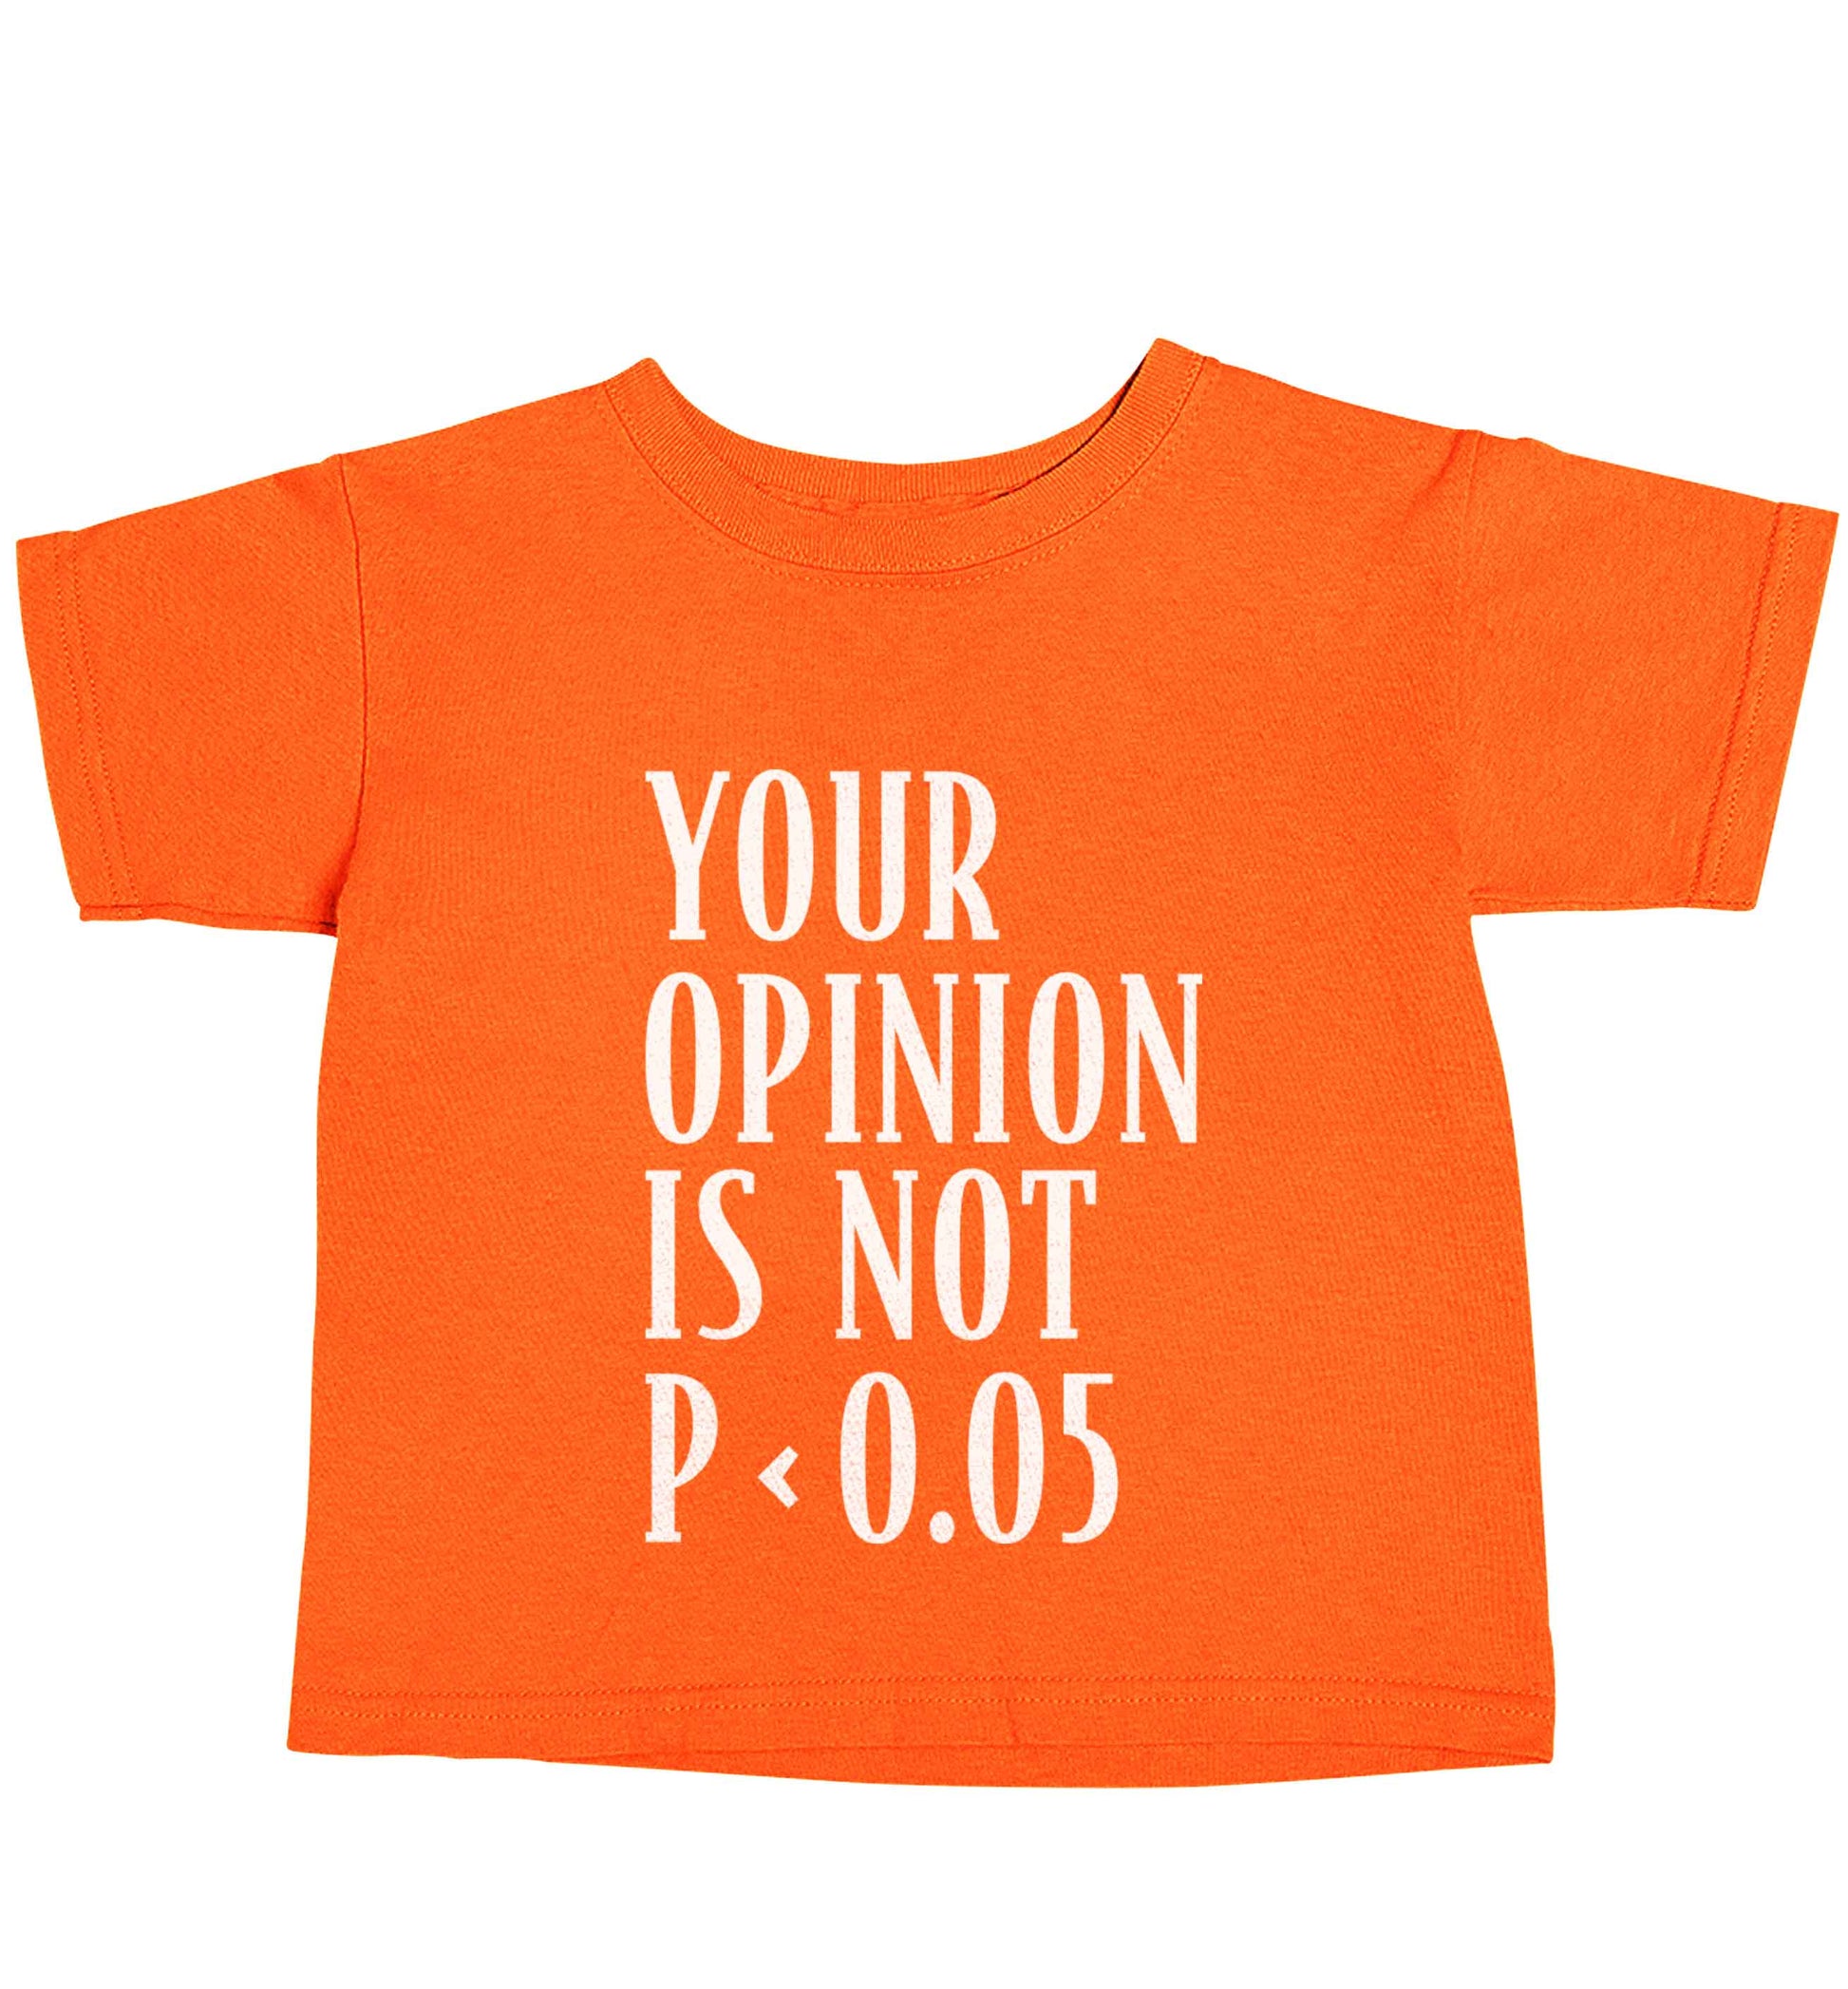 Your opinion is not P < 0.05orange baby toddler Tshirt 2 Years